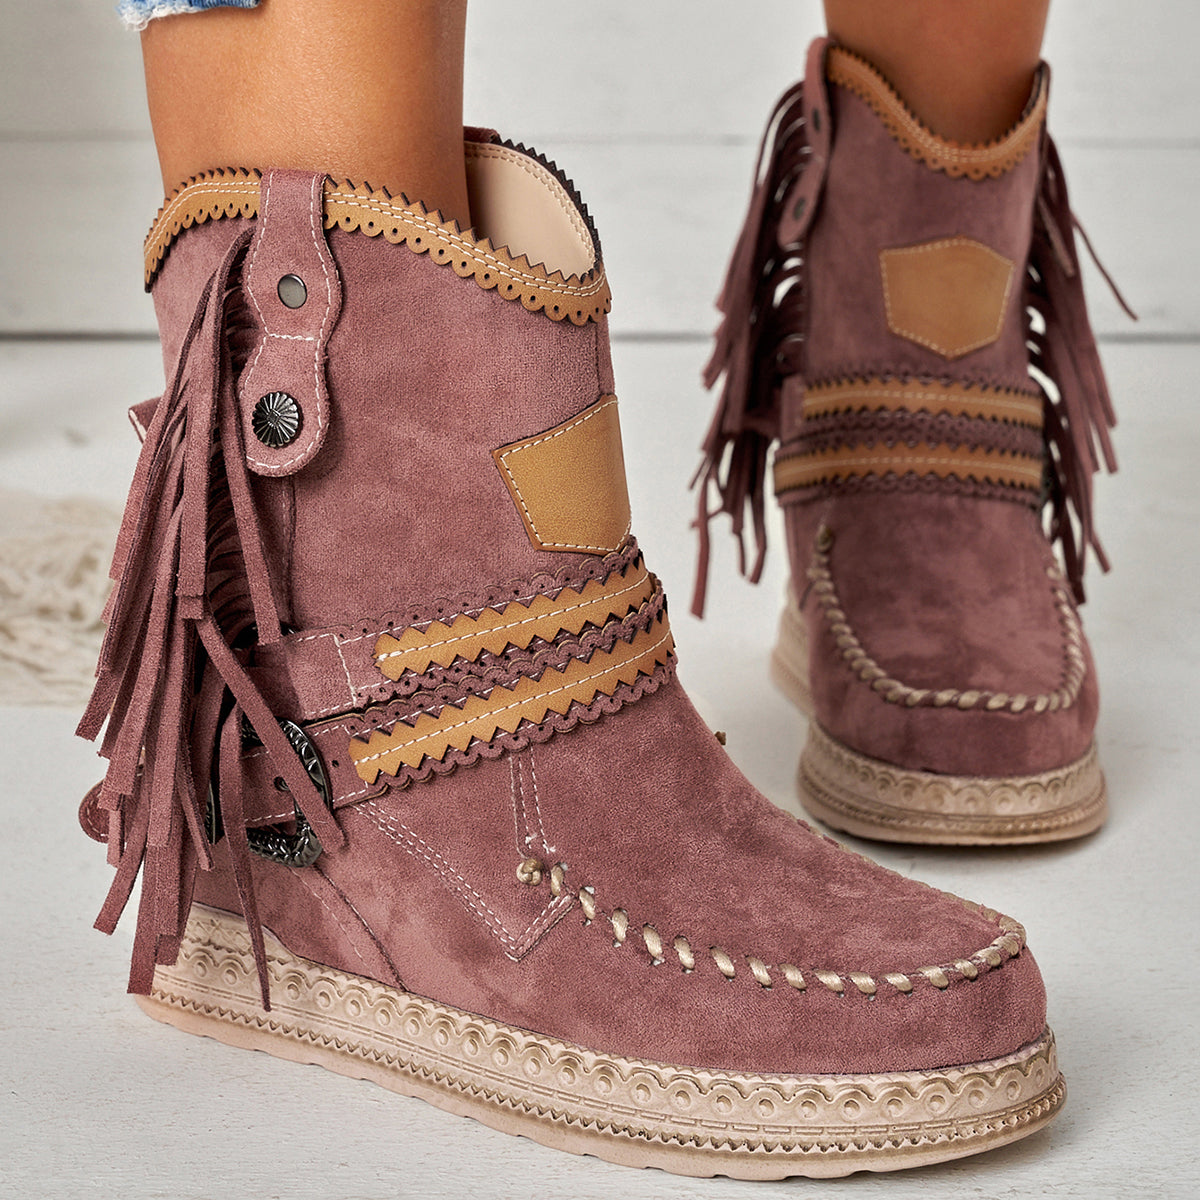 Veooy Tassel Cowboy Ankle Boots Stone Washed Wedge Heel Booties